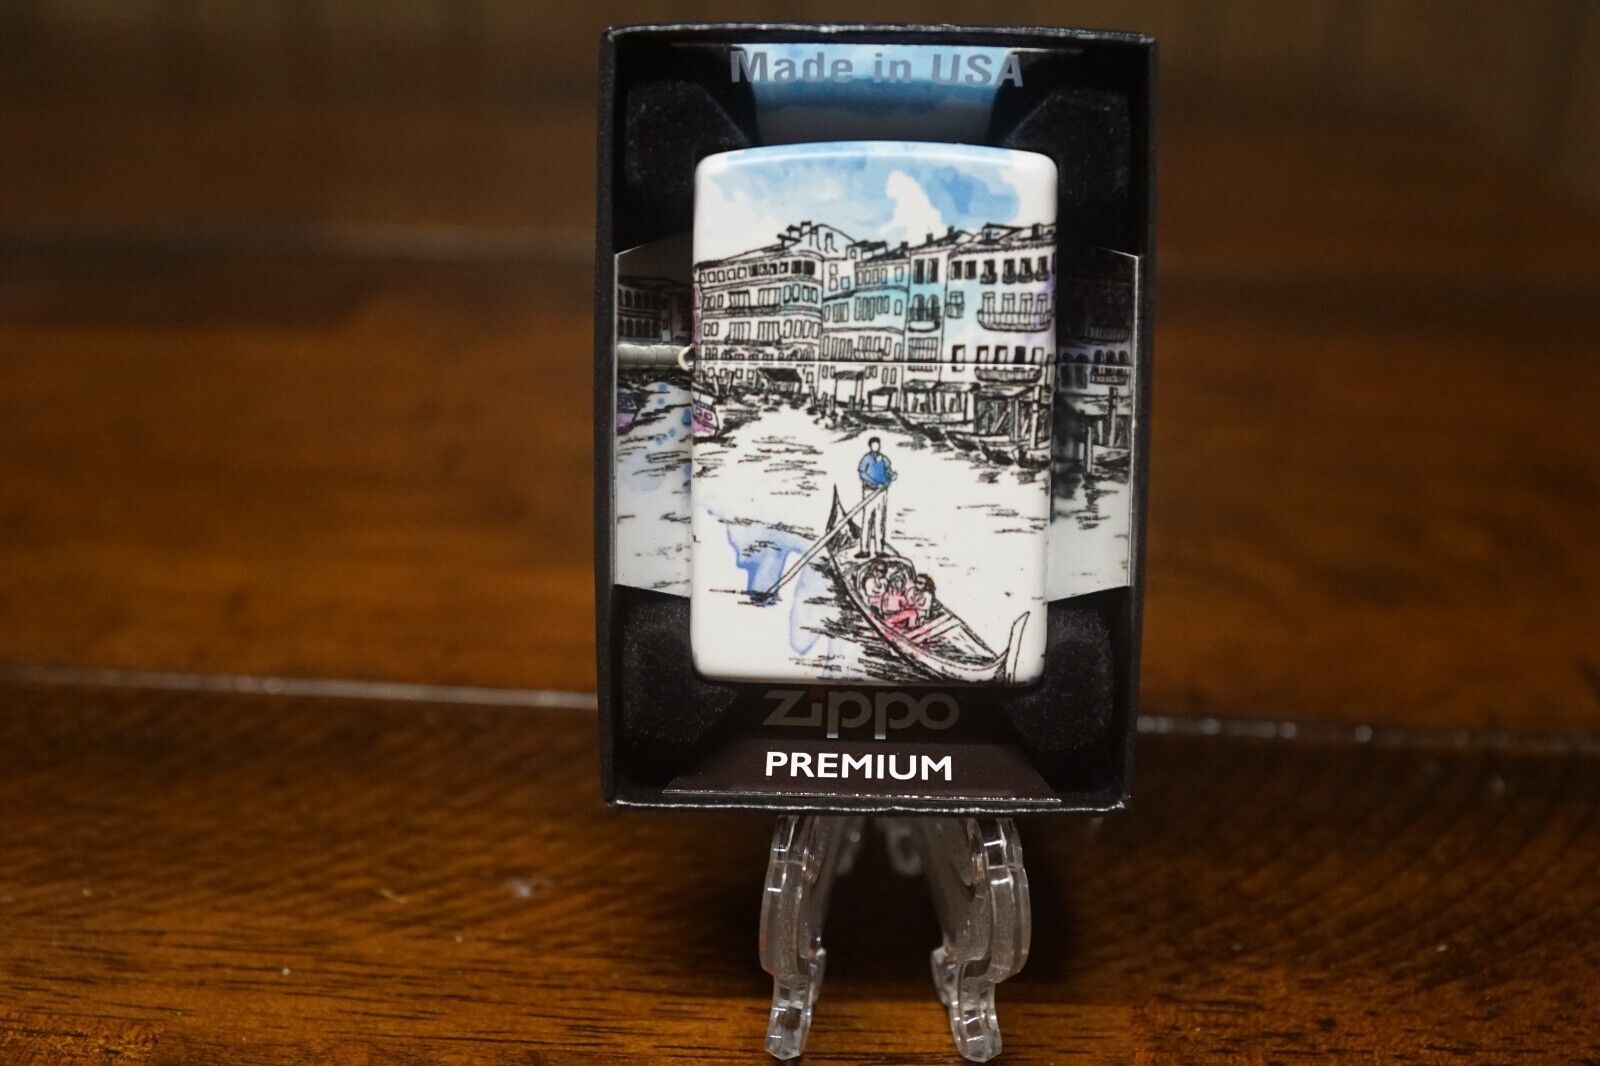 VENICE ITALY GONDOLA 540 DESIGN ZIPPO LIGHTER MINT IN BOX. Available Now for 39.95